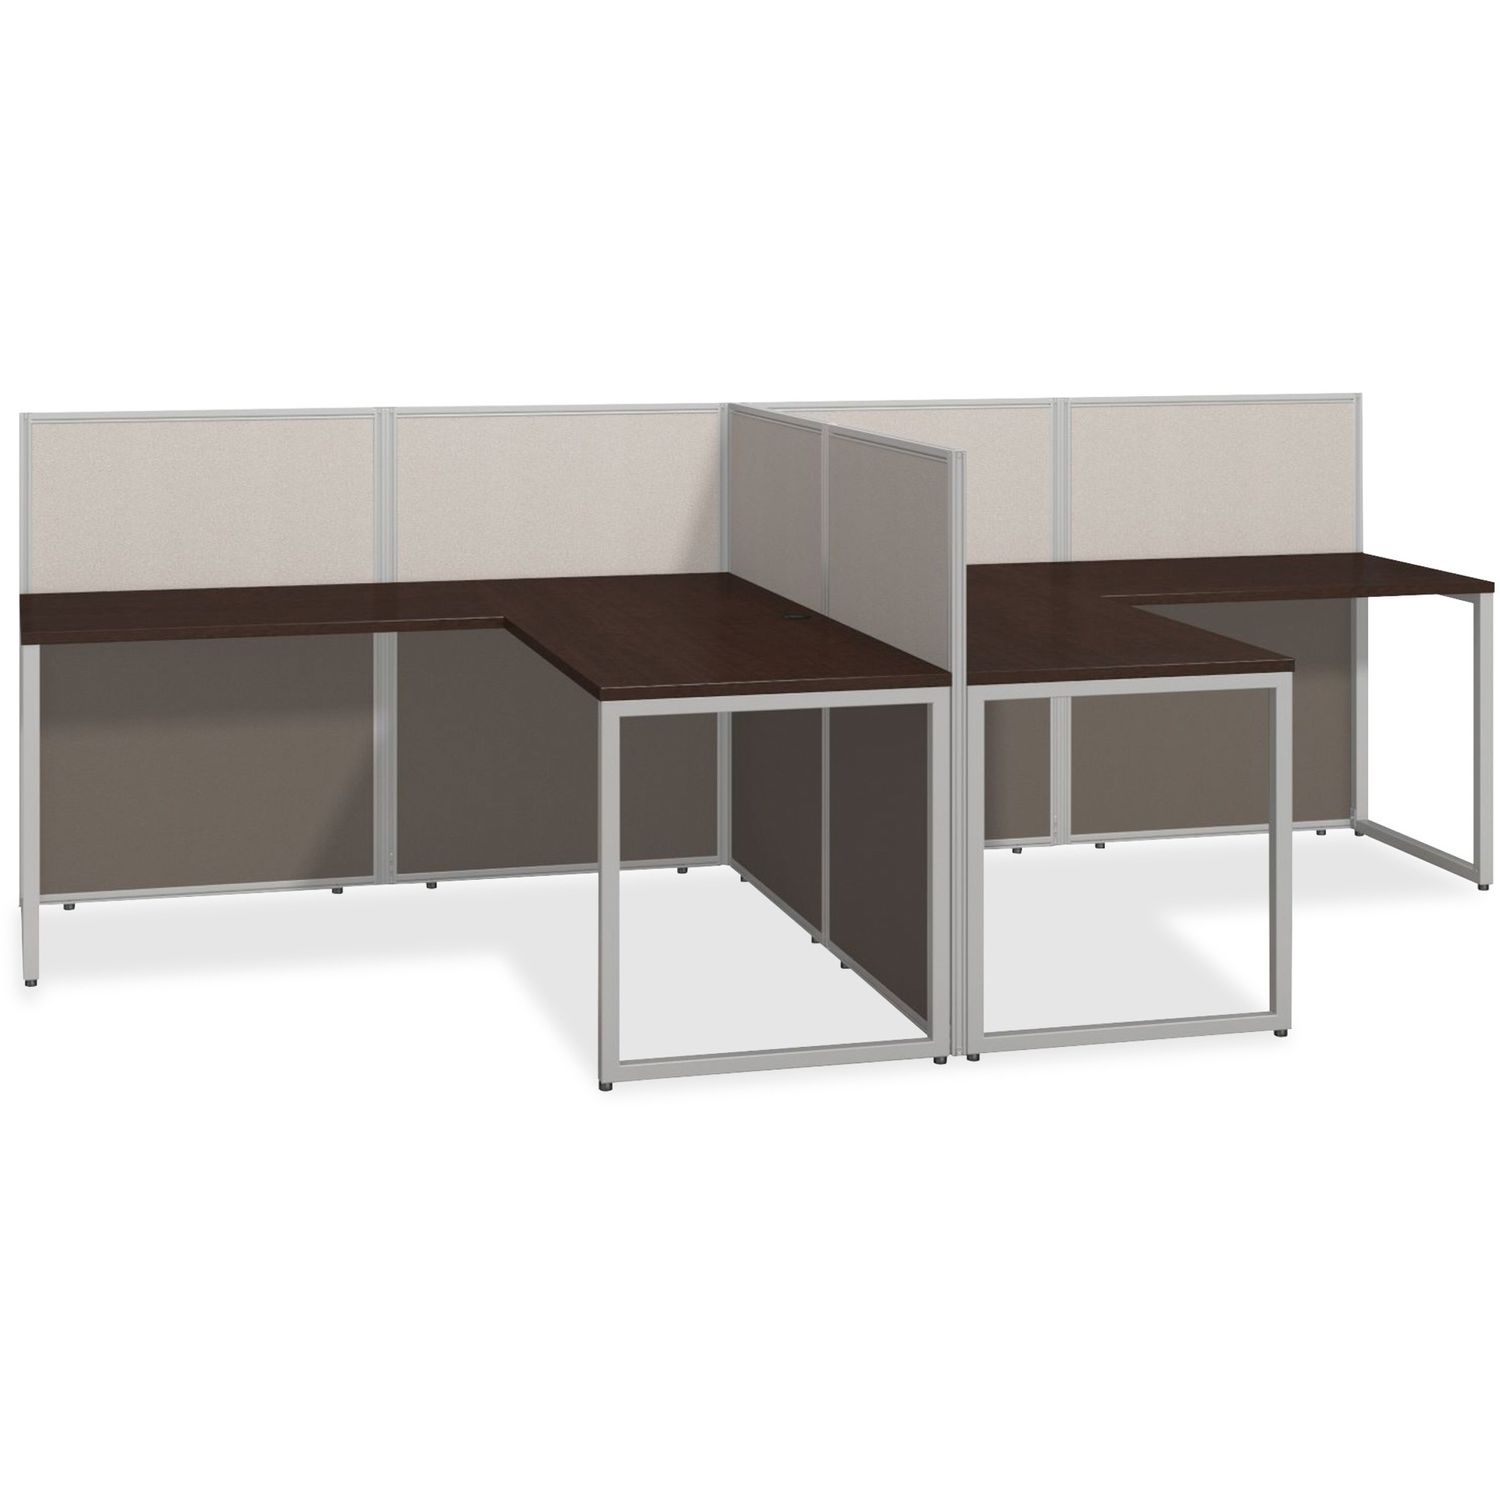 Easy Office 60W 2 Person L Desk Open Office - 3-Drawer 60" x 119.1" x 44.9" , 1" Work Surface, 3, Material: Thermofused Laminate (TFL) Work Surface, Metal Panel, Engineered Wood